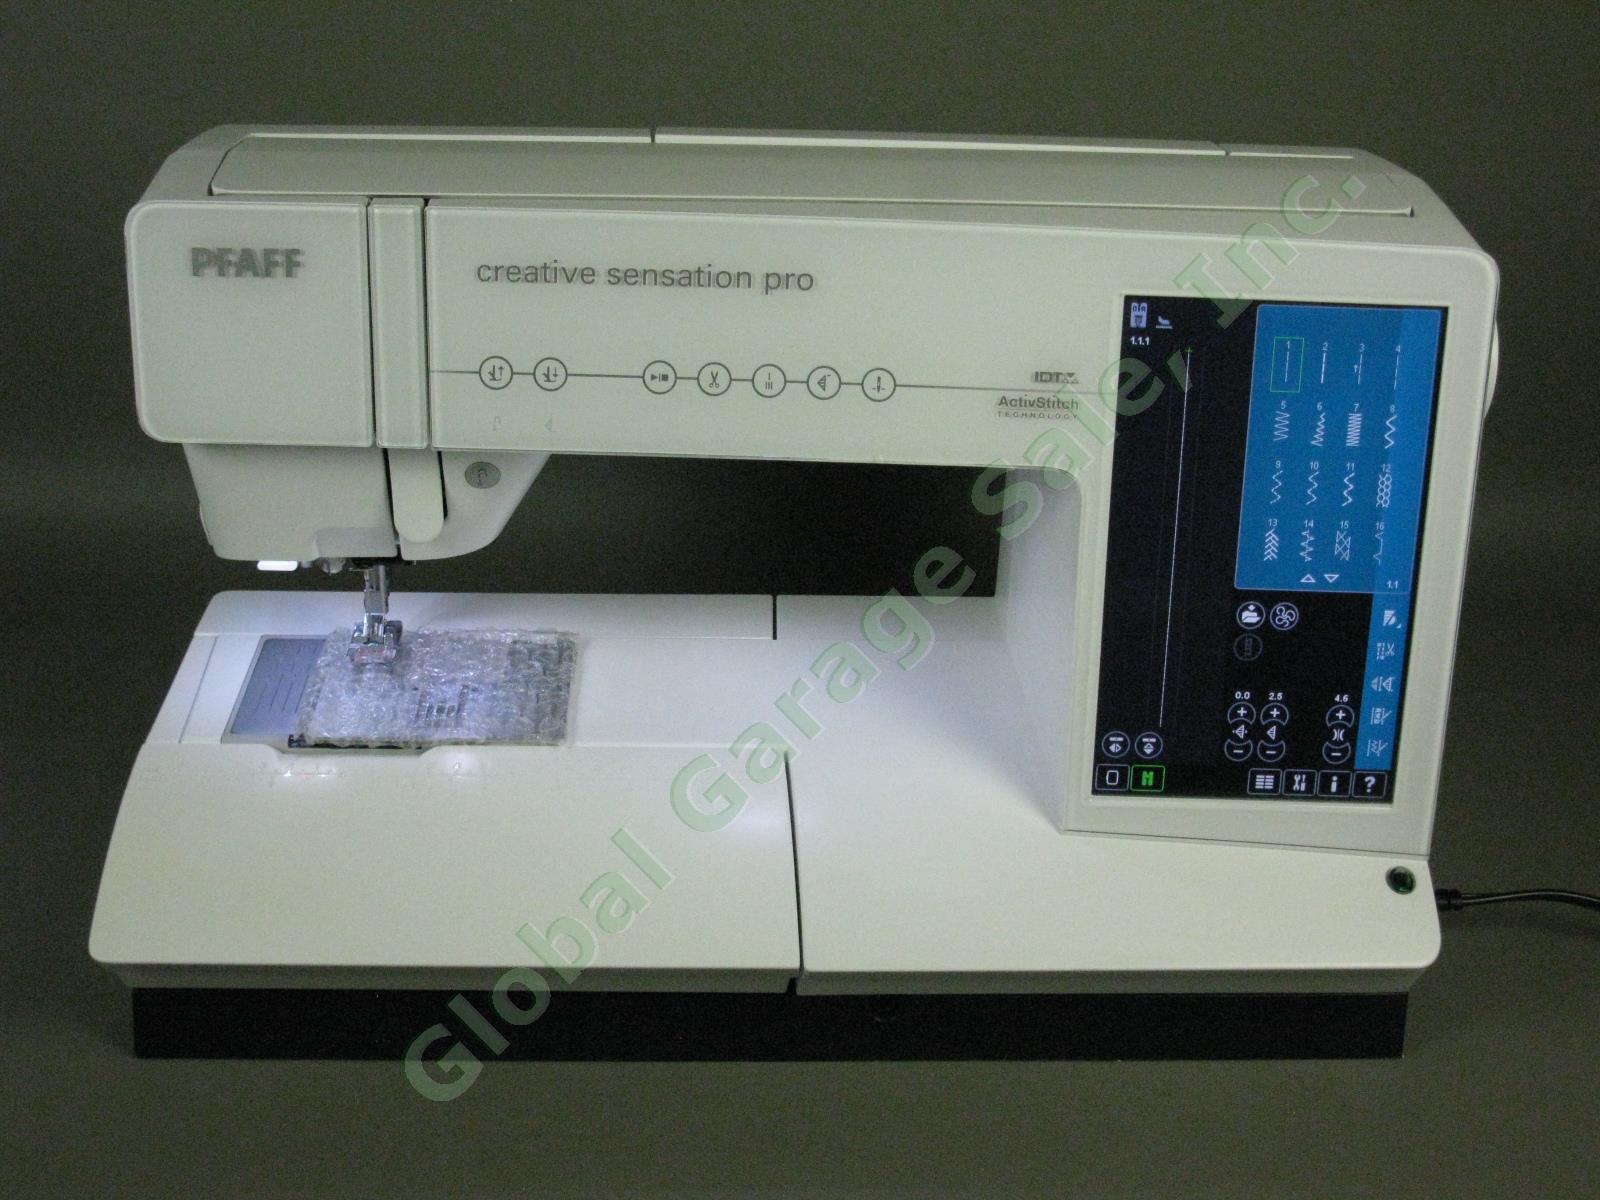 Pfaff Creative Sensation Pro Sewing/Embroidery Machine 1 Owner Exc Cond Serviced 2